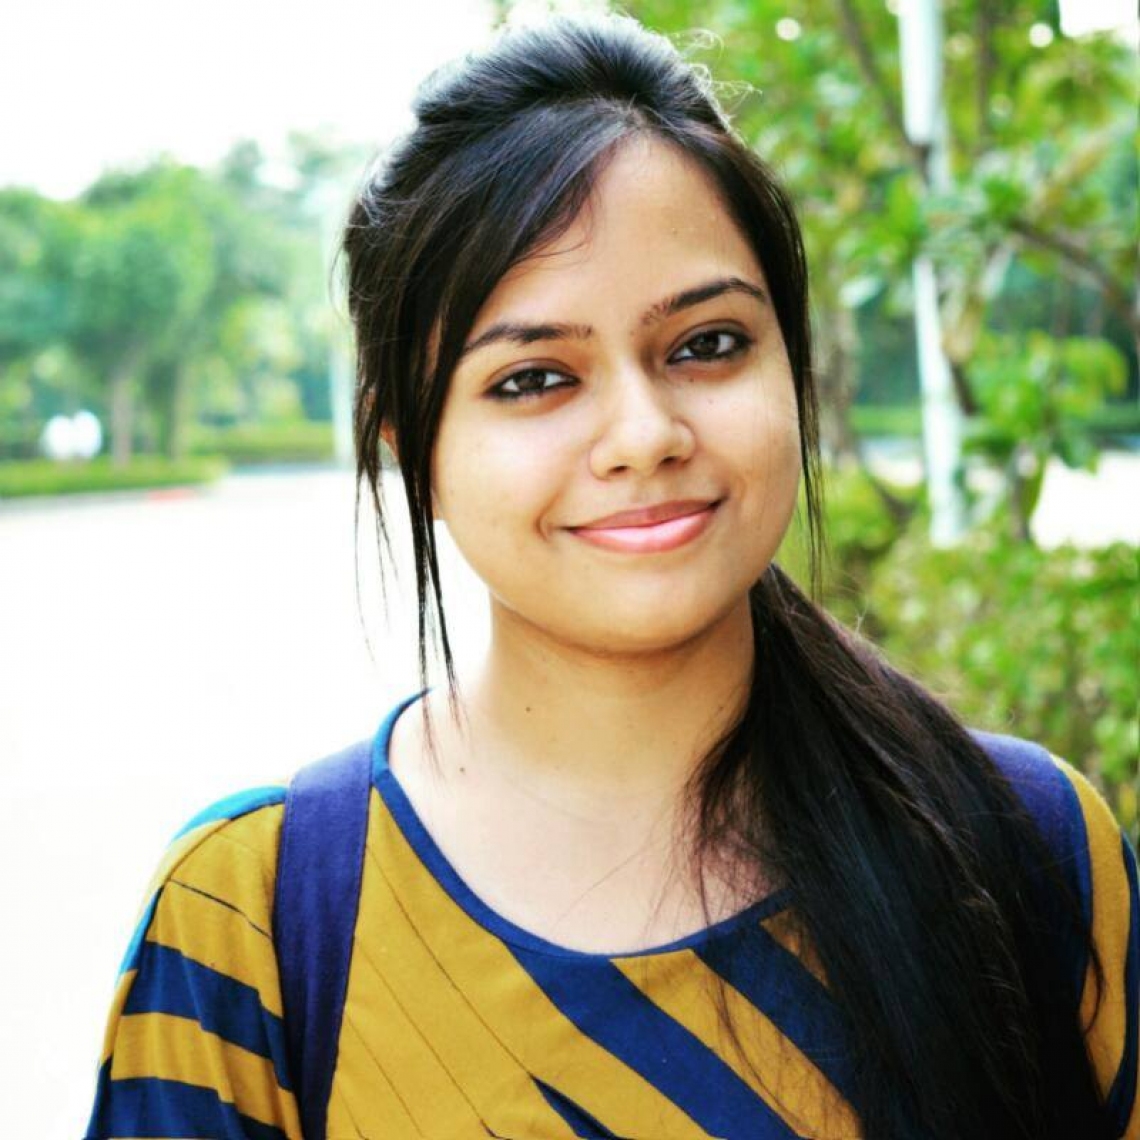 Amrita Hazarika, CE, Class of 2016, selected for M.Sc. Structural Engineering at Technical University of Delft, Netherlands